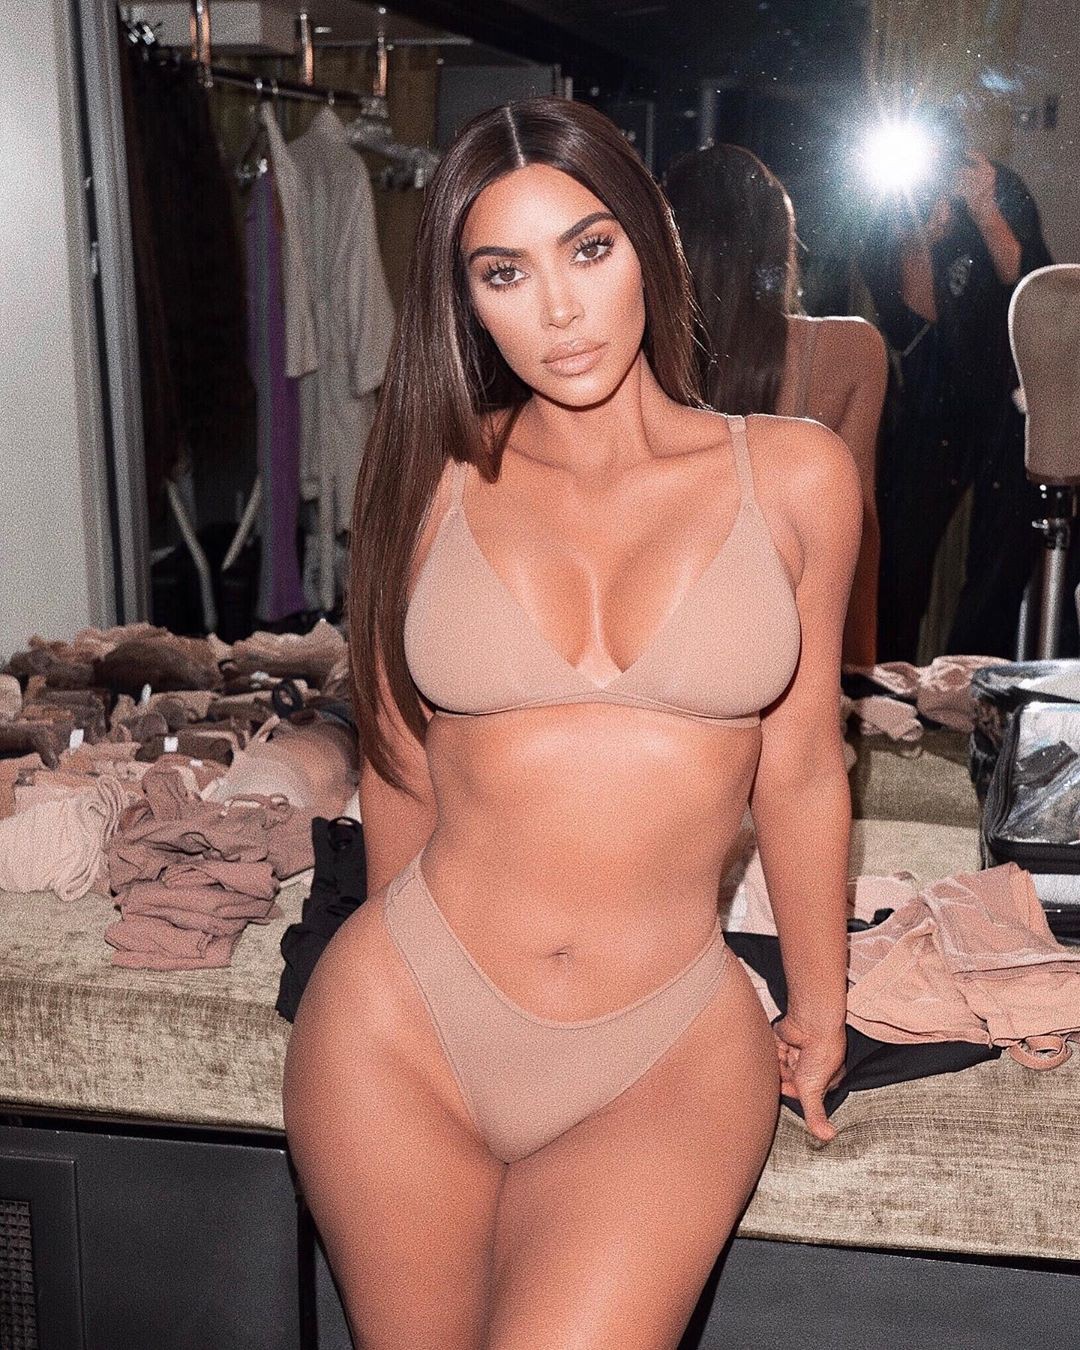 Thicc Kim Kardashian Stylevore: celebrity pictures,  pretty cute female celebrities,  Taylor hottest moments,  Kim,  Kardashian,  Stylevore,  Kim Kardashian Legs,  Kim Kardashian Hairstyle,  Kim Kardashian Images  